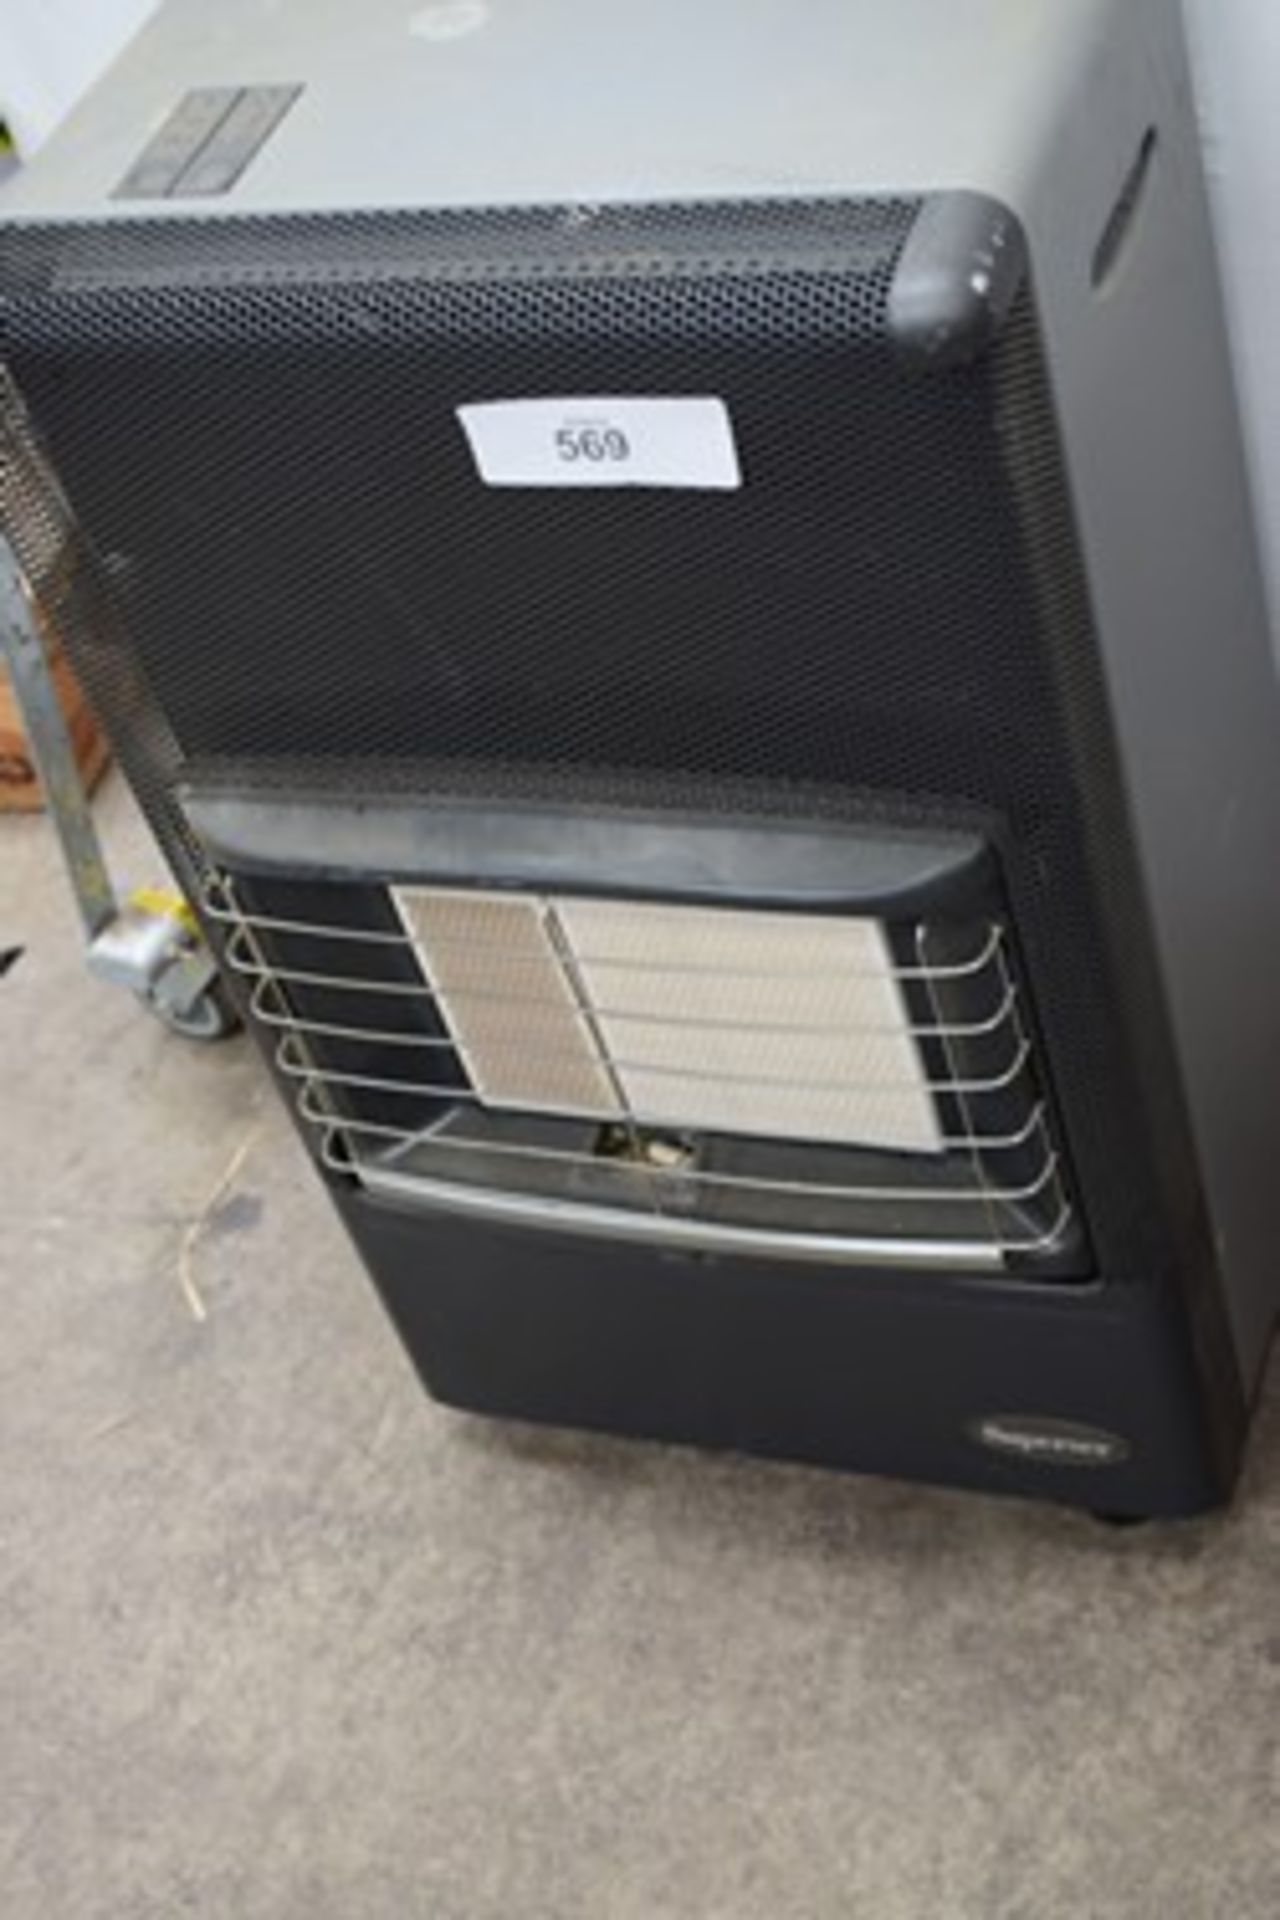 1 x Elite gas room heater, model: PO-E01, together with 1 x second-hand unbranded LPG heater - - Image 2 of 2